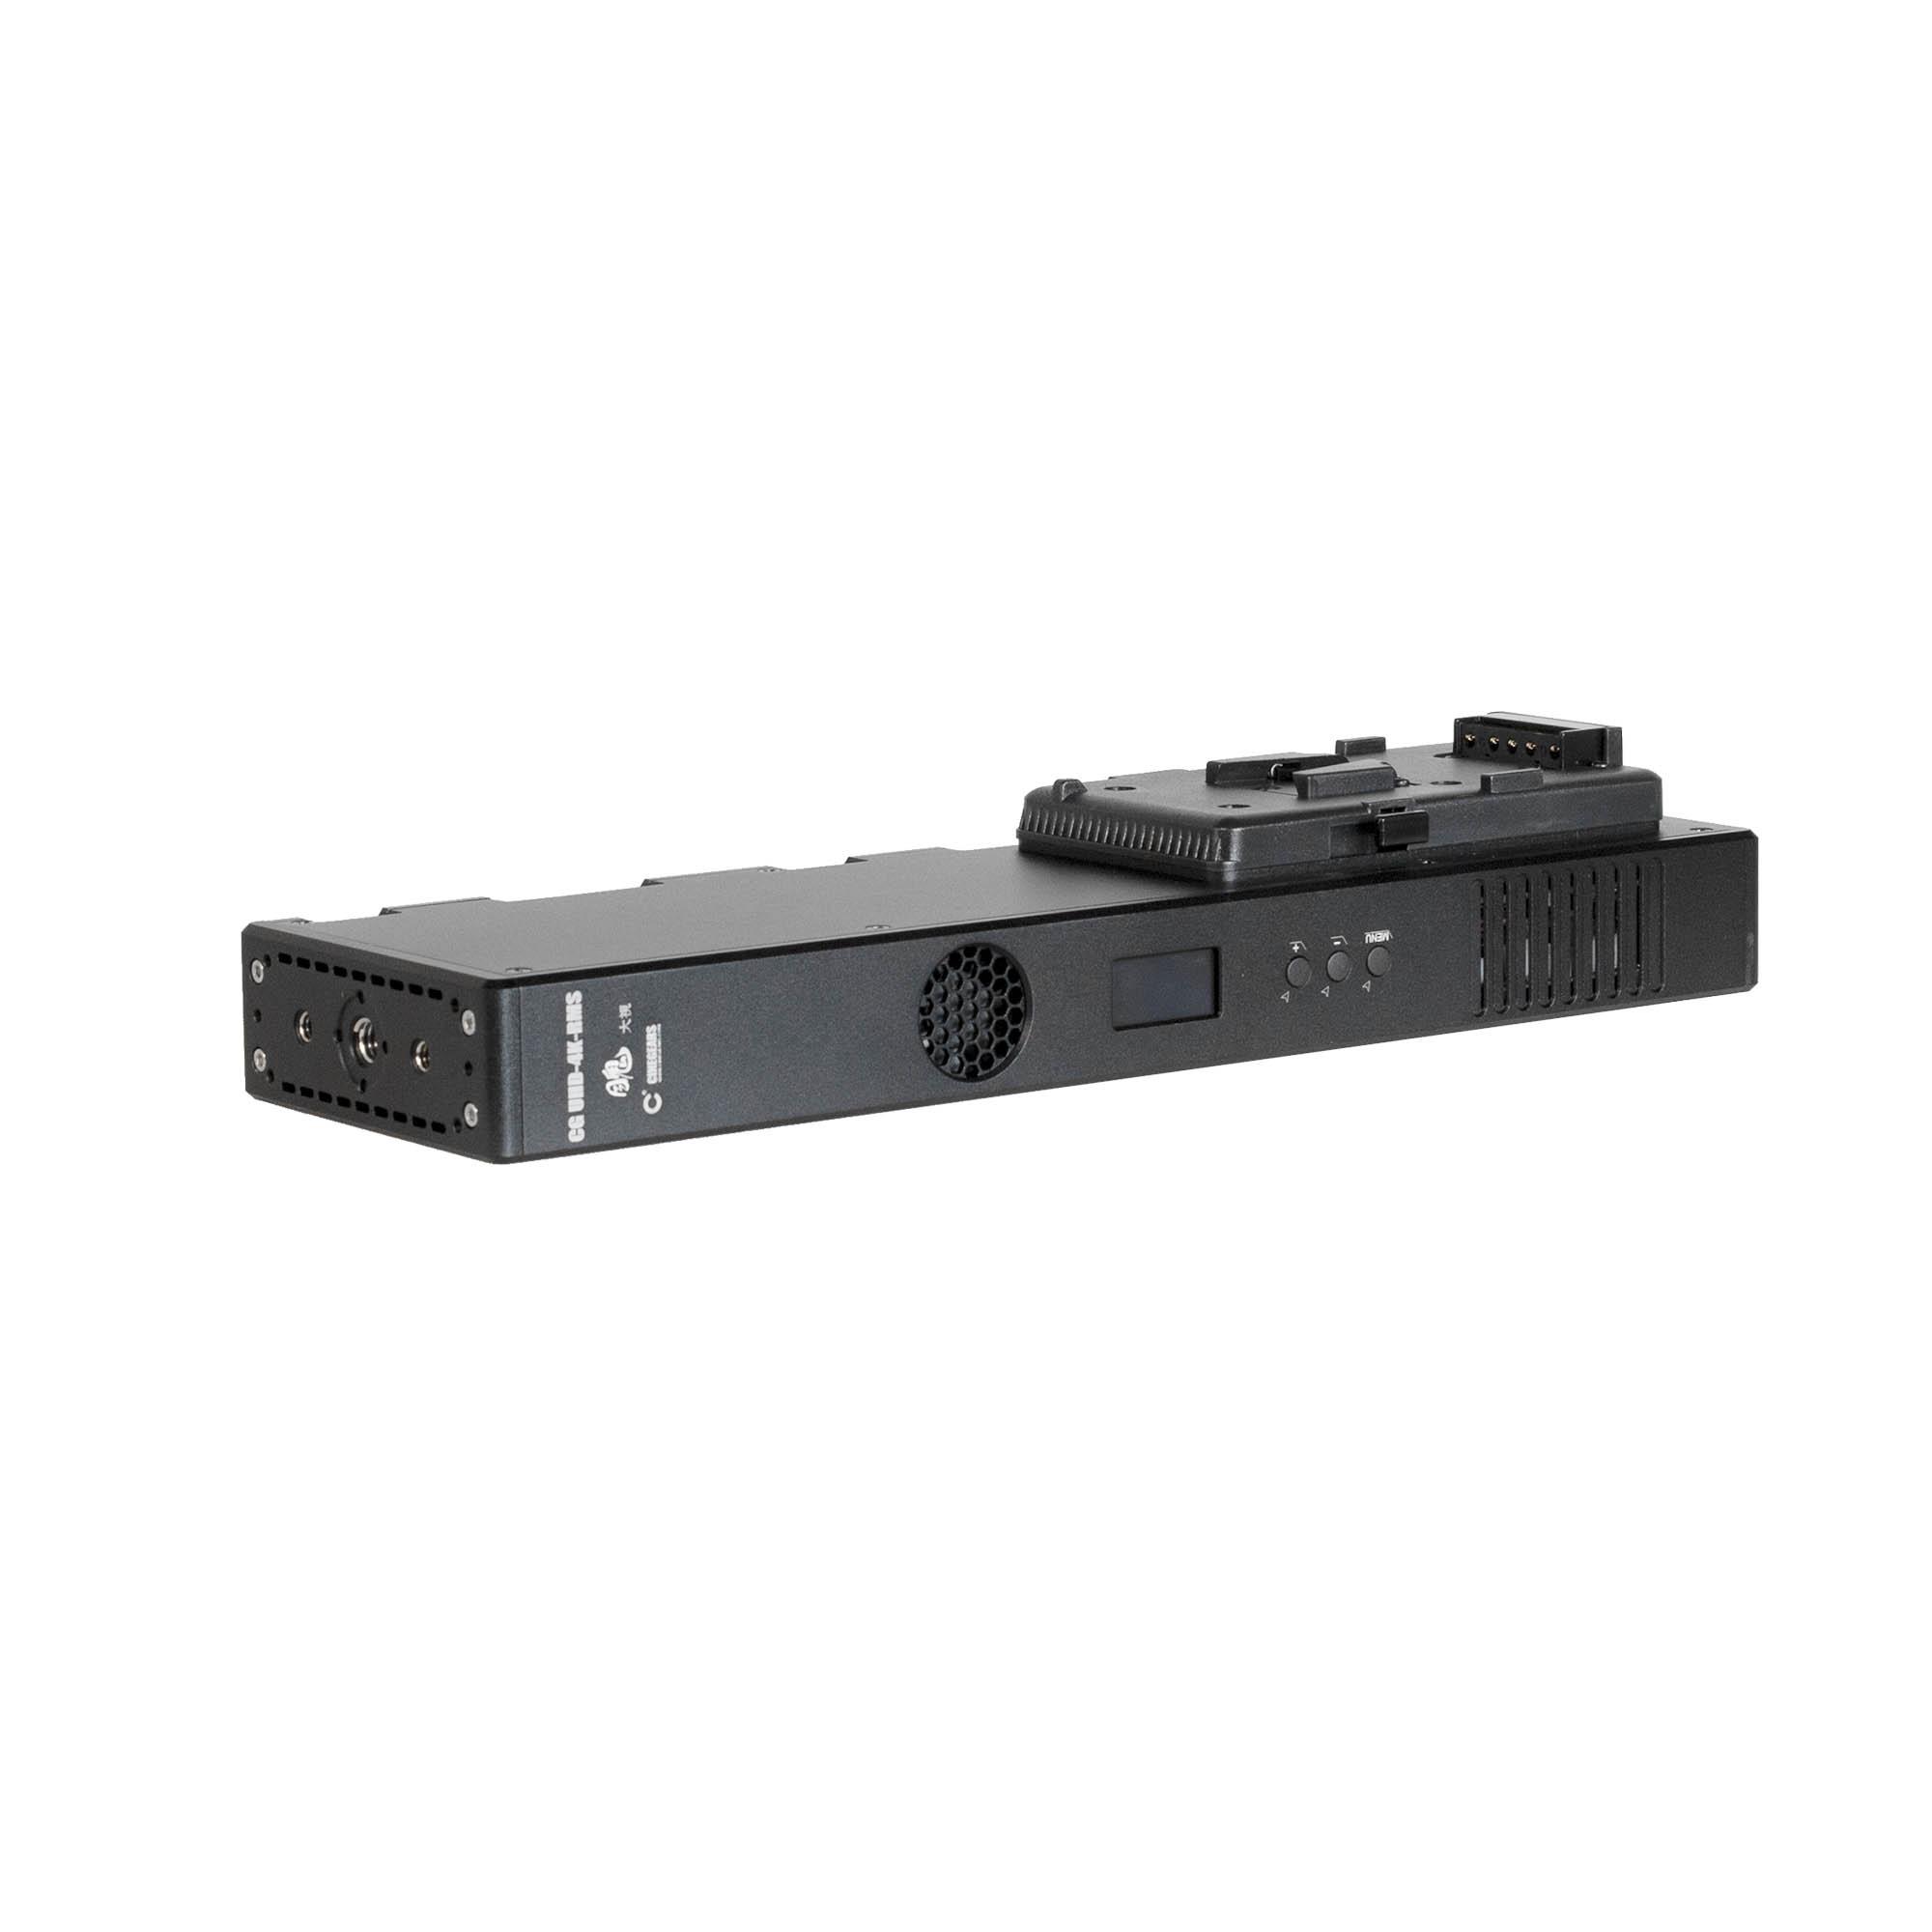 Ghost-Eye 4K UHD Wireless Video Transmission Redundant Management RMS Kit with Two Receiver